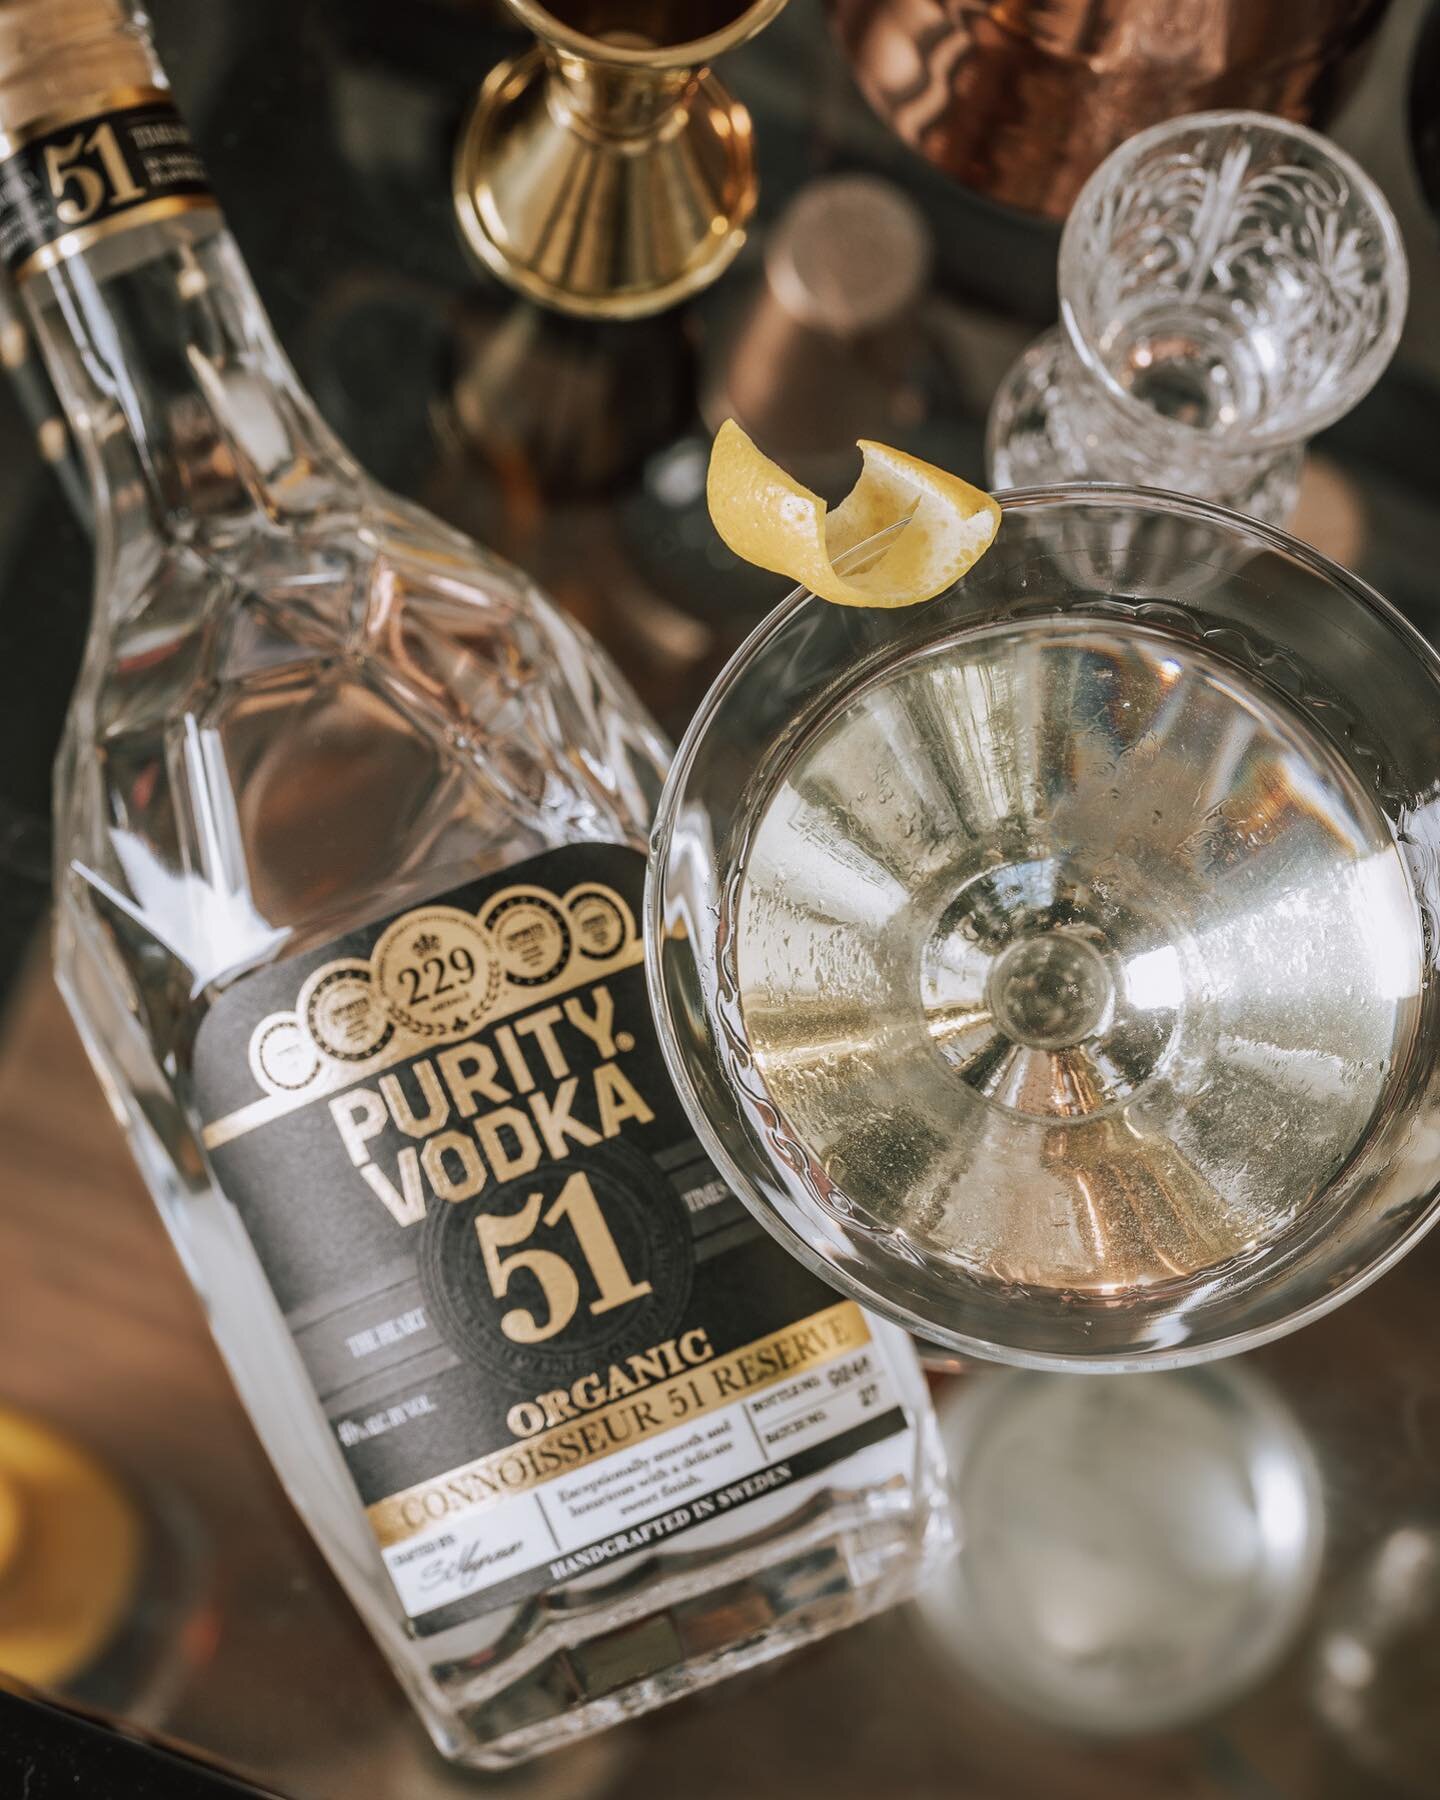 For better martinis, use Purity Connoisseur 51 Reserve Organic Vodka. It has smooth flavor and nice body for a better cocktail experience.

You can order online at http://puritydistilleryus.com.

#purityvodka #puritydistillery #cocktailsofinstagram